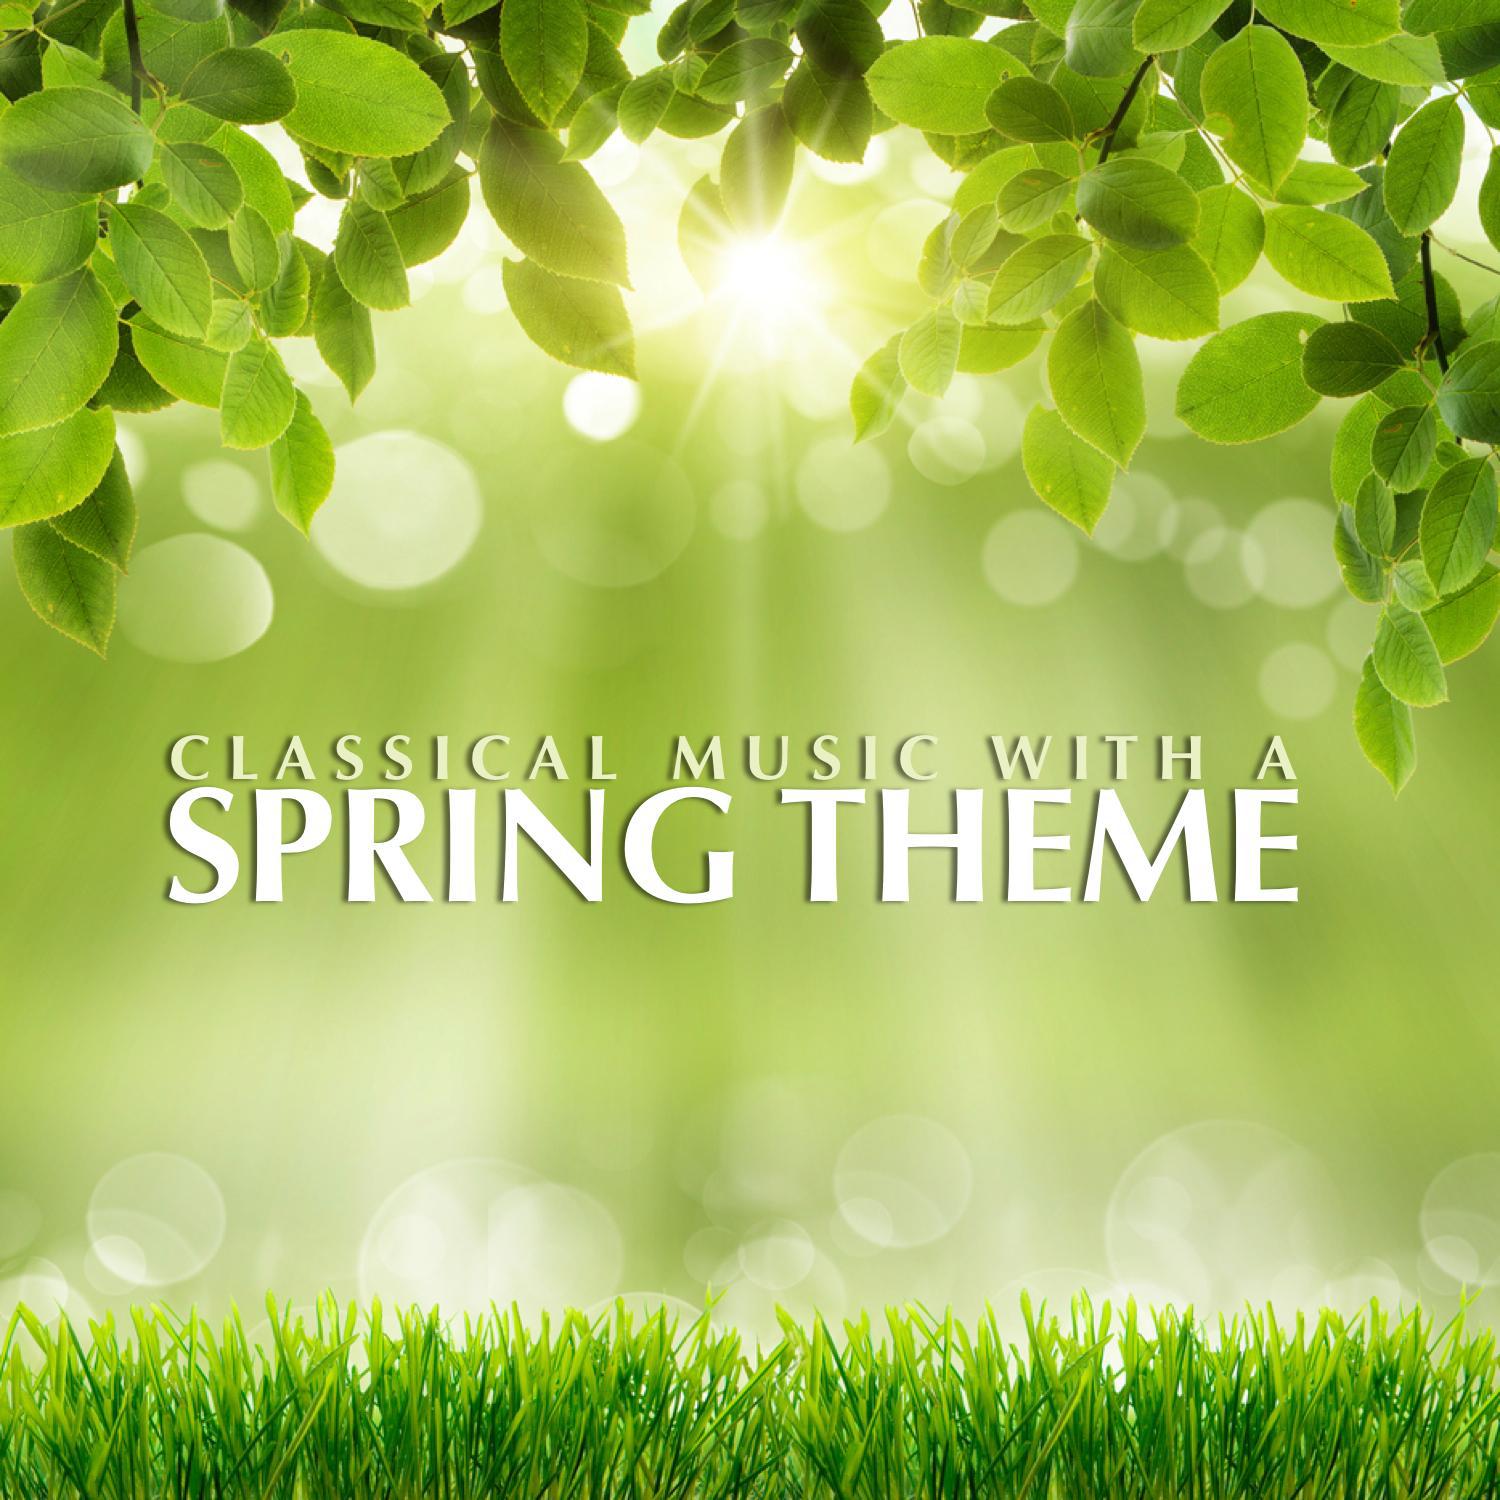 Classical Music With a Spring Theme